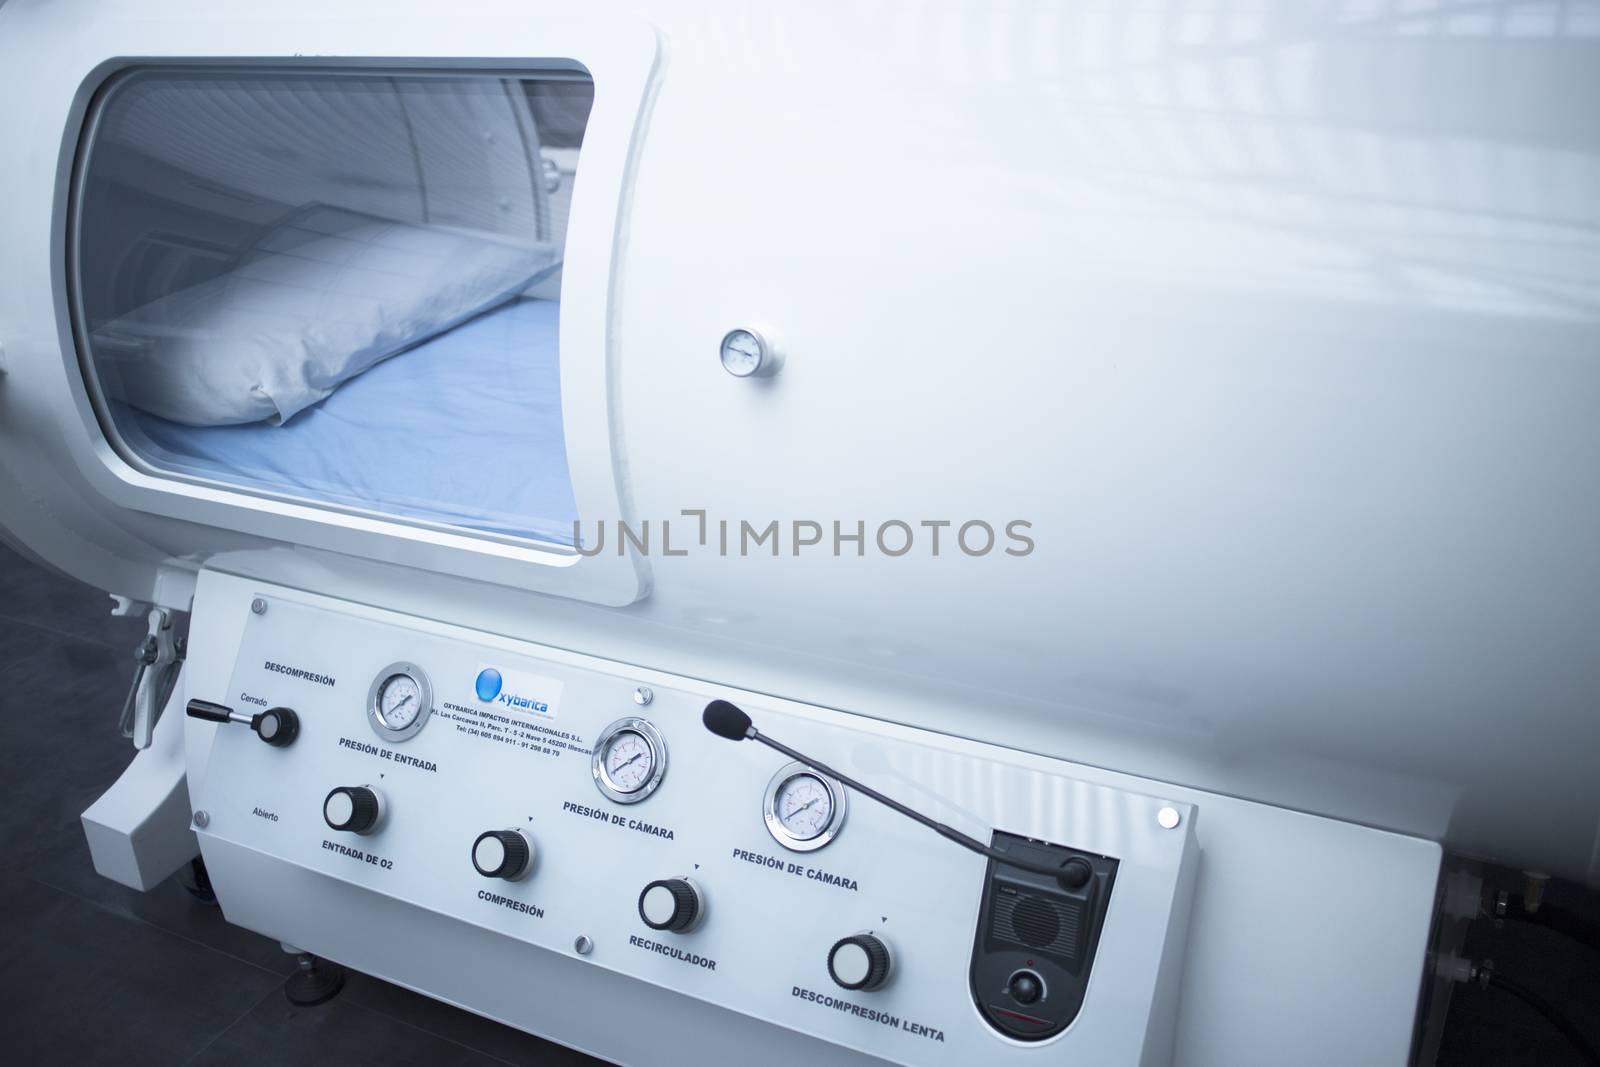 HBOT Hyperbaric Oxygen Therapy treatment chamber by edwardolive